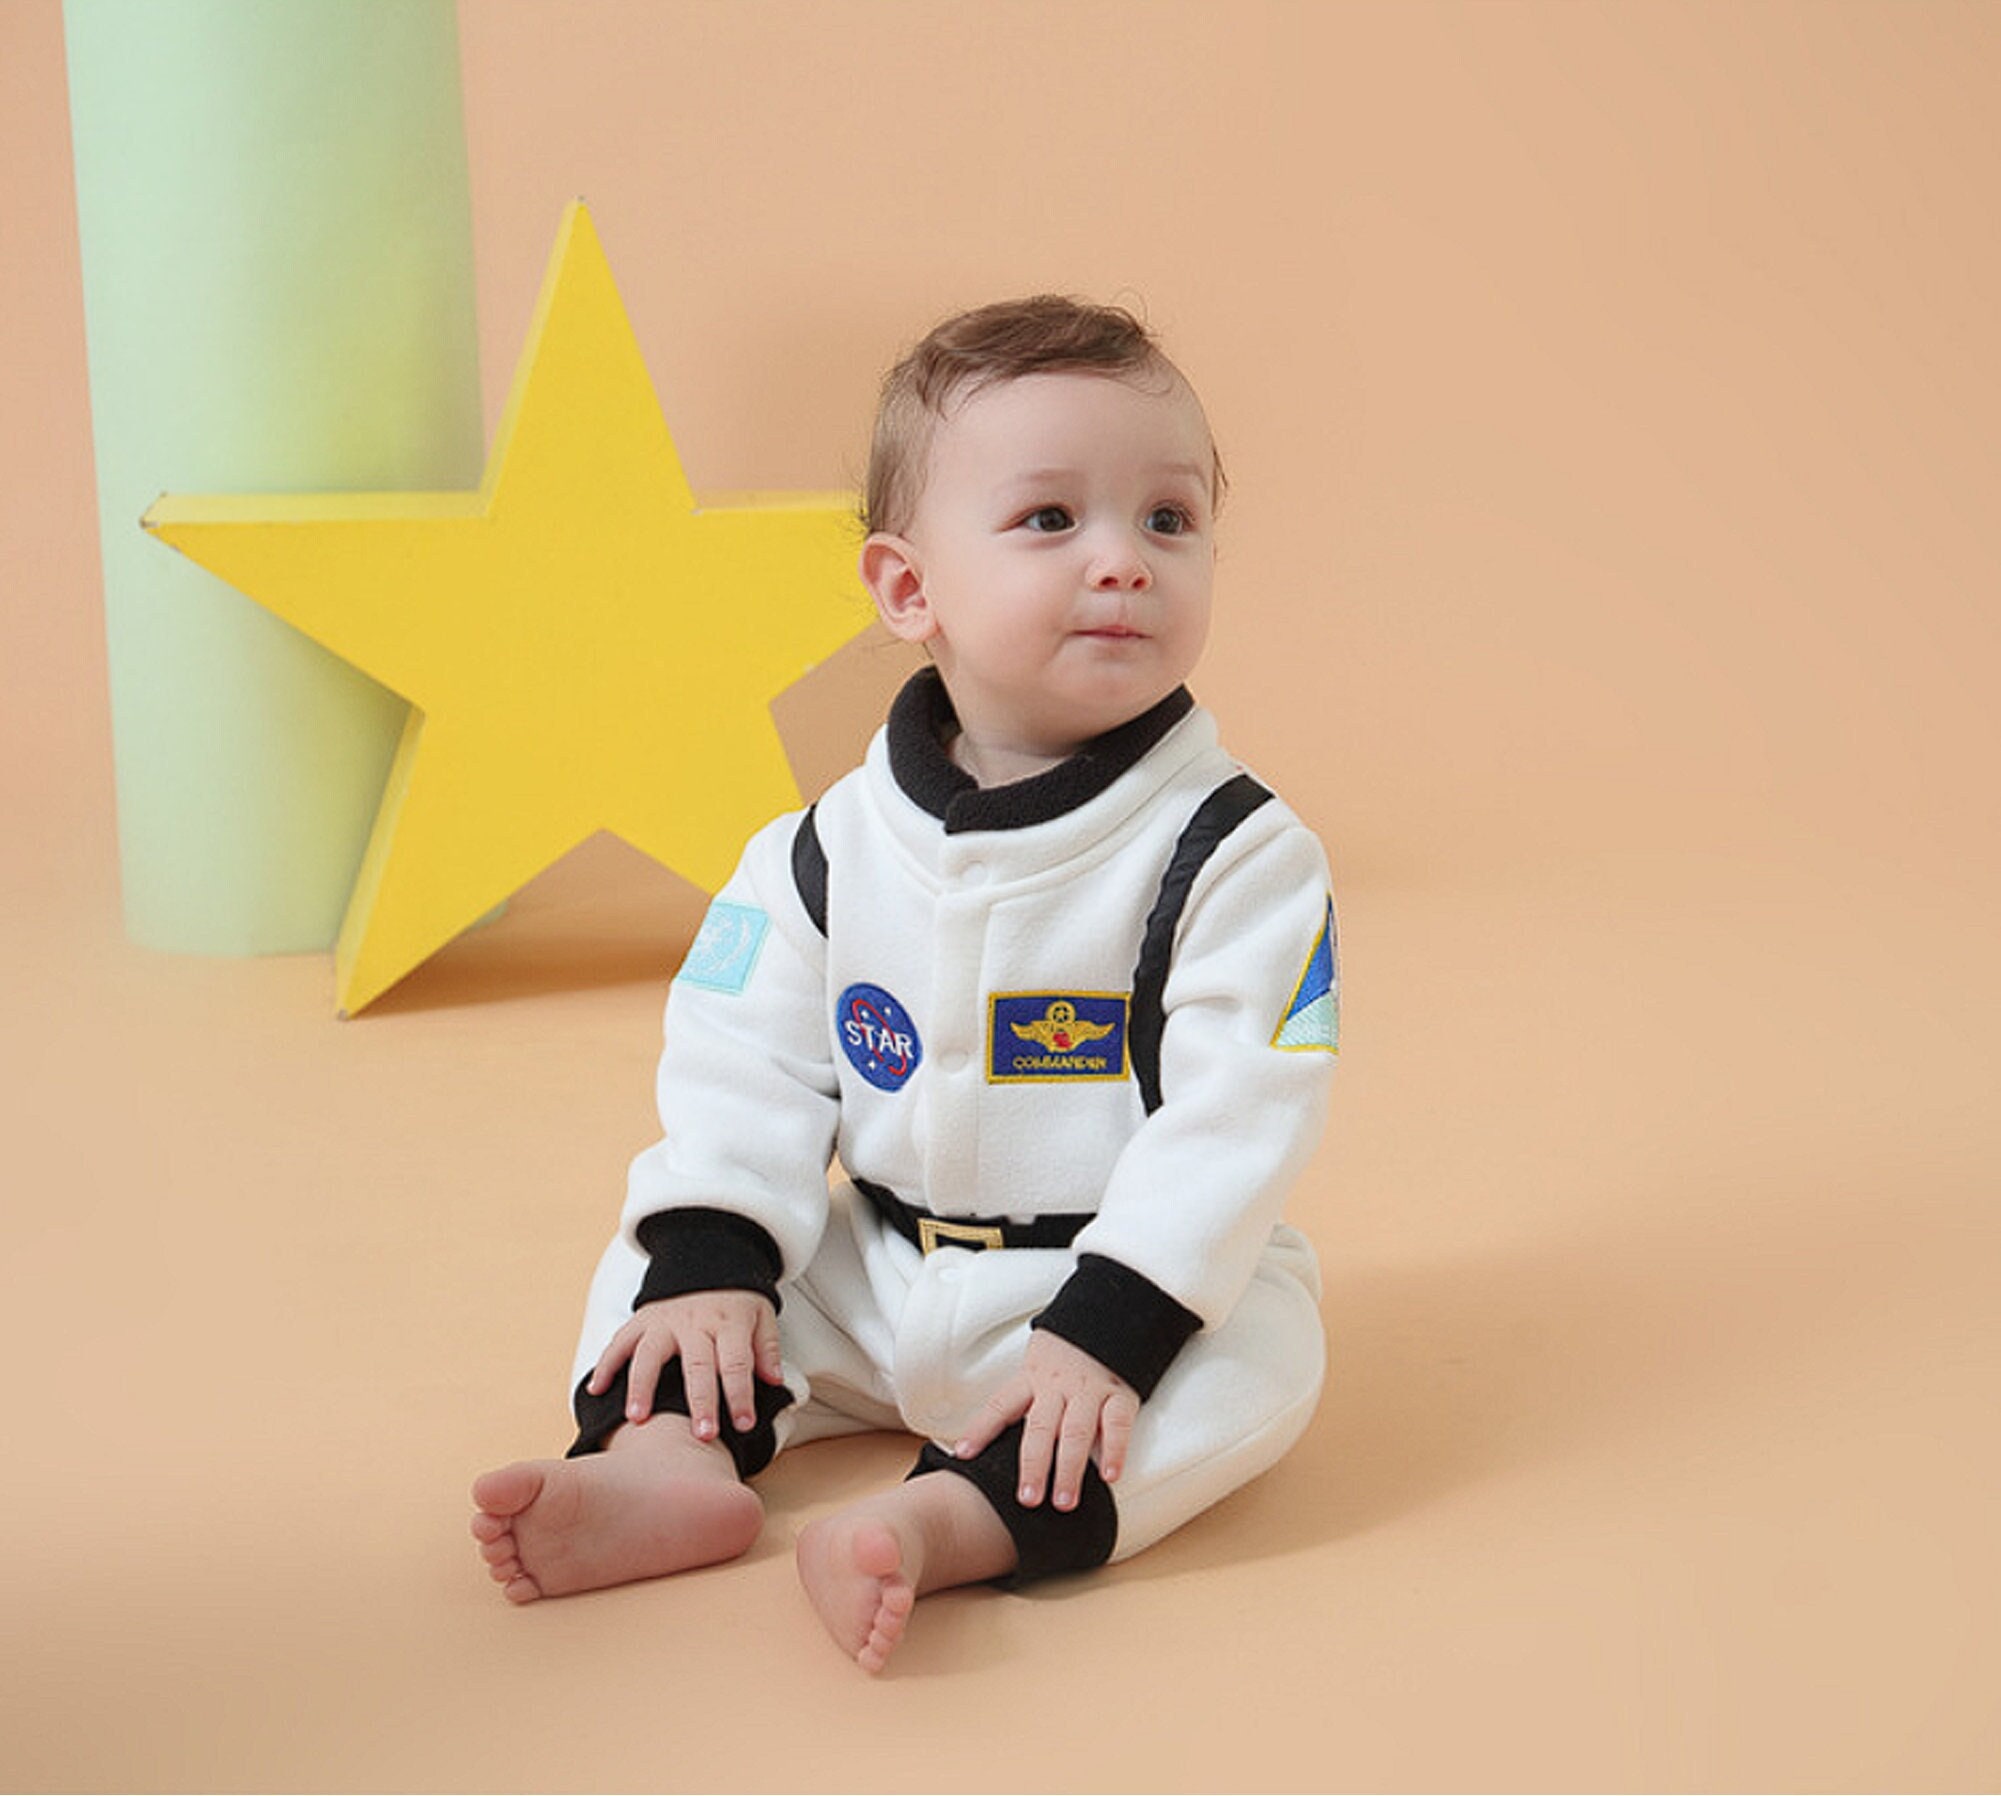 SALE Astronaut Leggings 12-18m Girls Outer Space Kids Pants STEM Girl  Clothes Science Kid Clothing Toddler Planet Star Galaxy NASA Rocket 